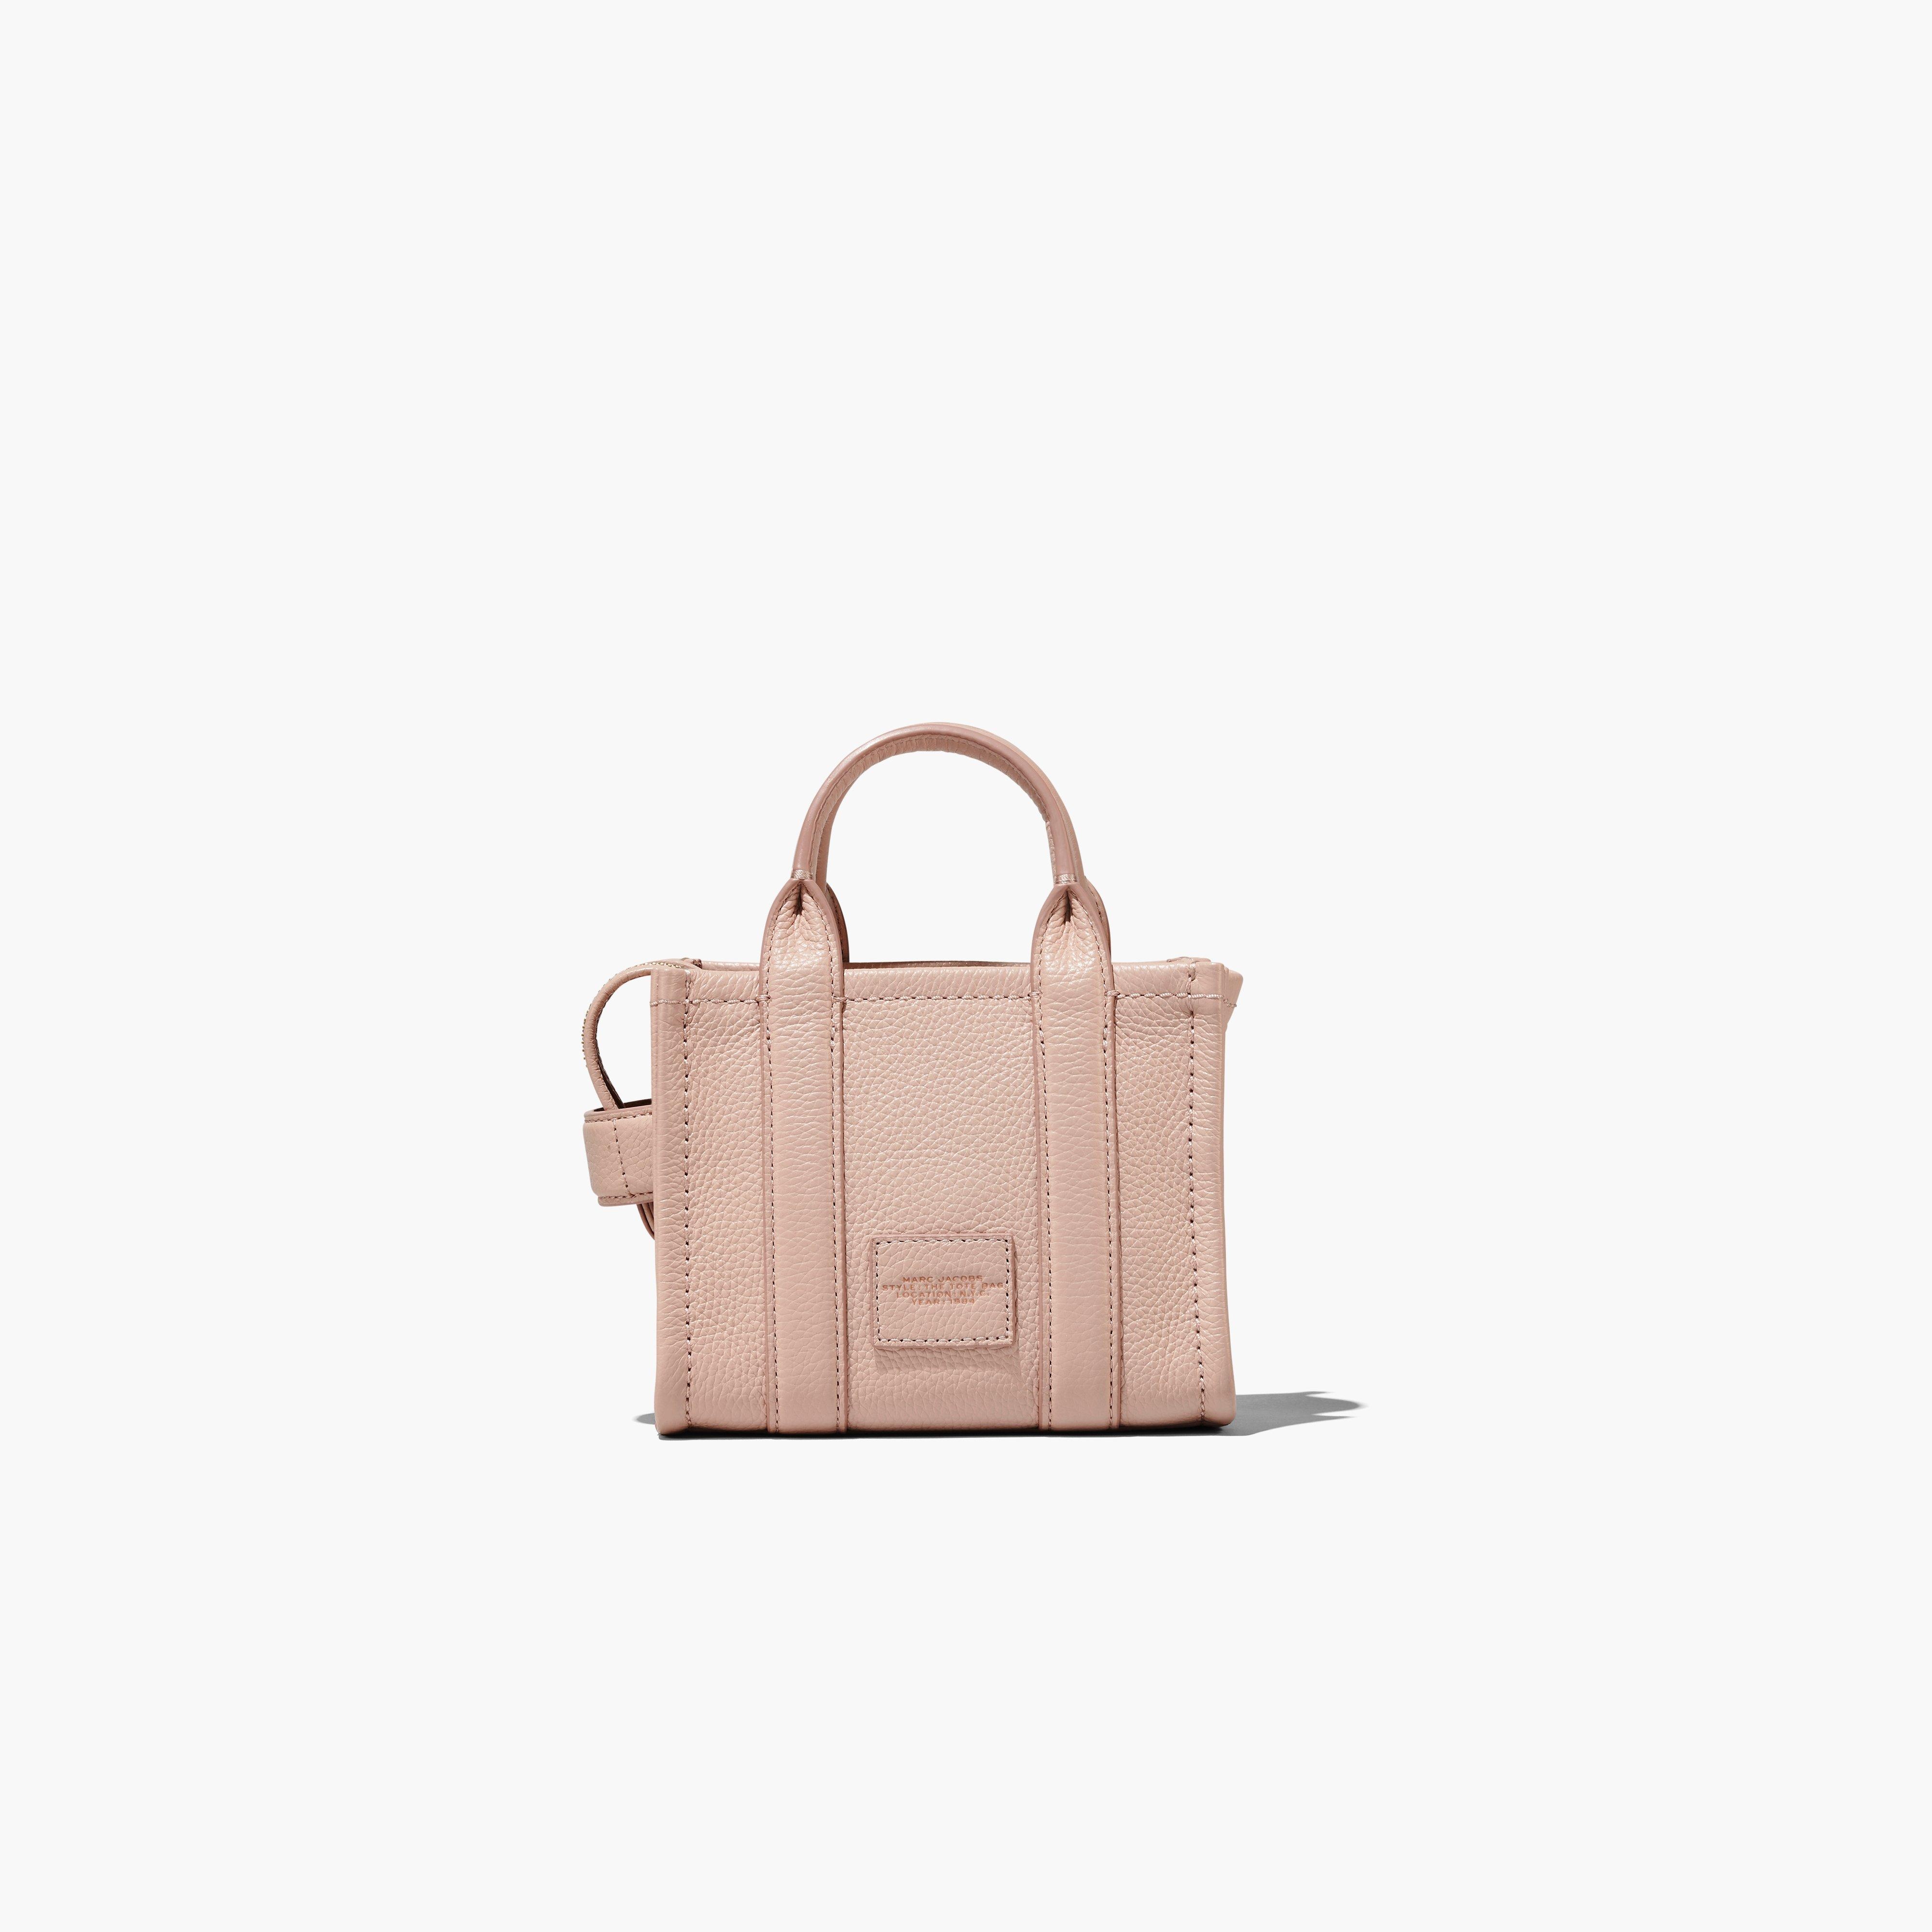 THE LEATHER MICRO TOTE BAG - 6